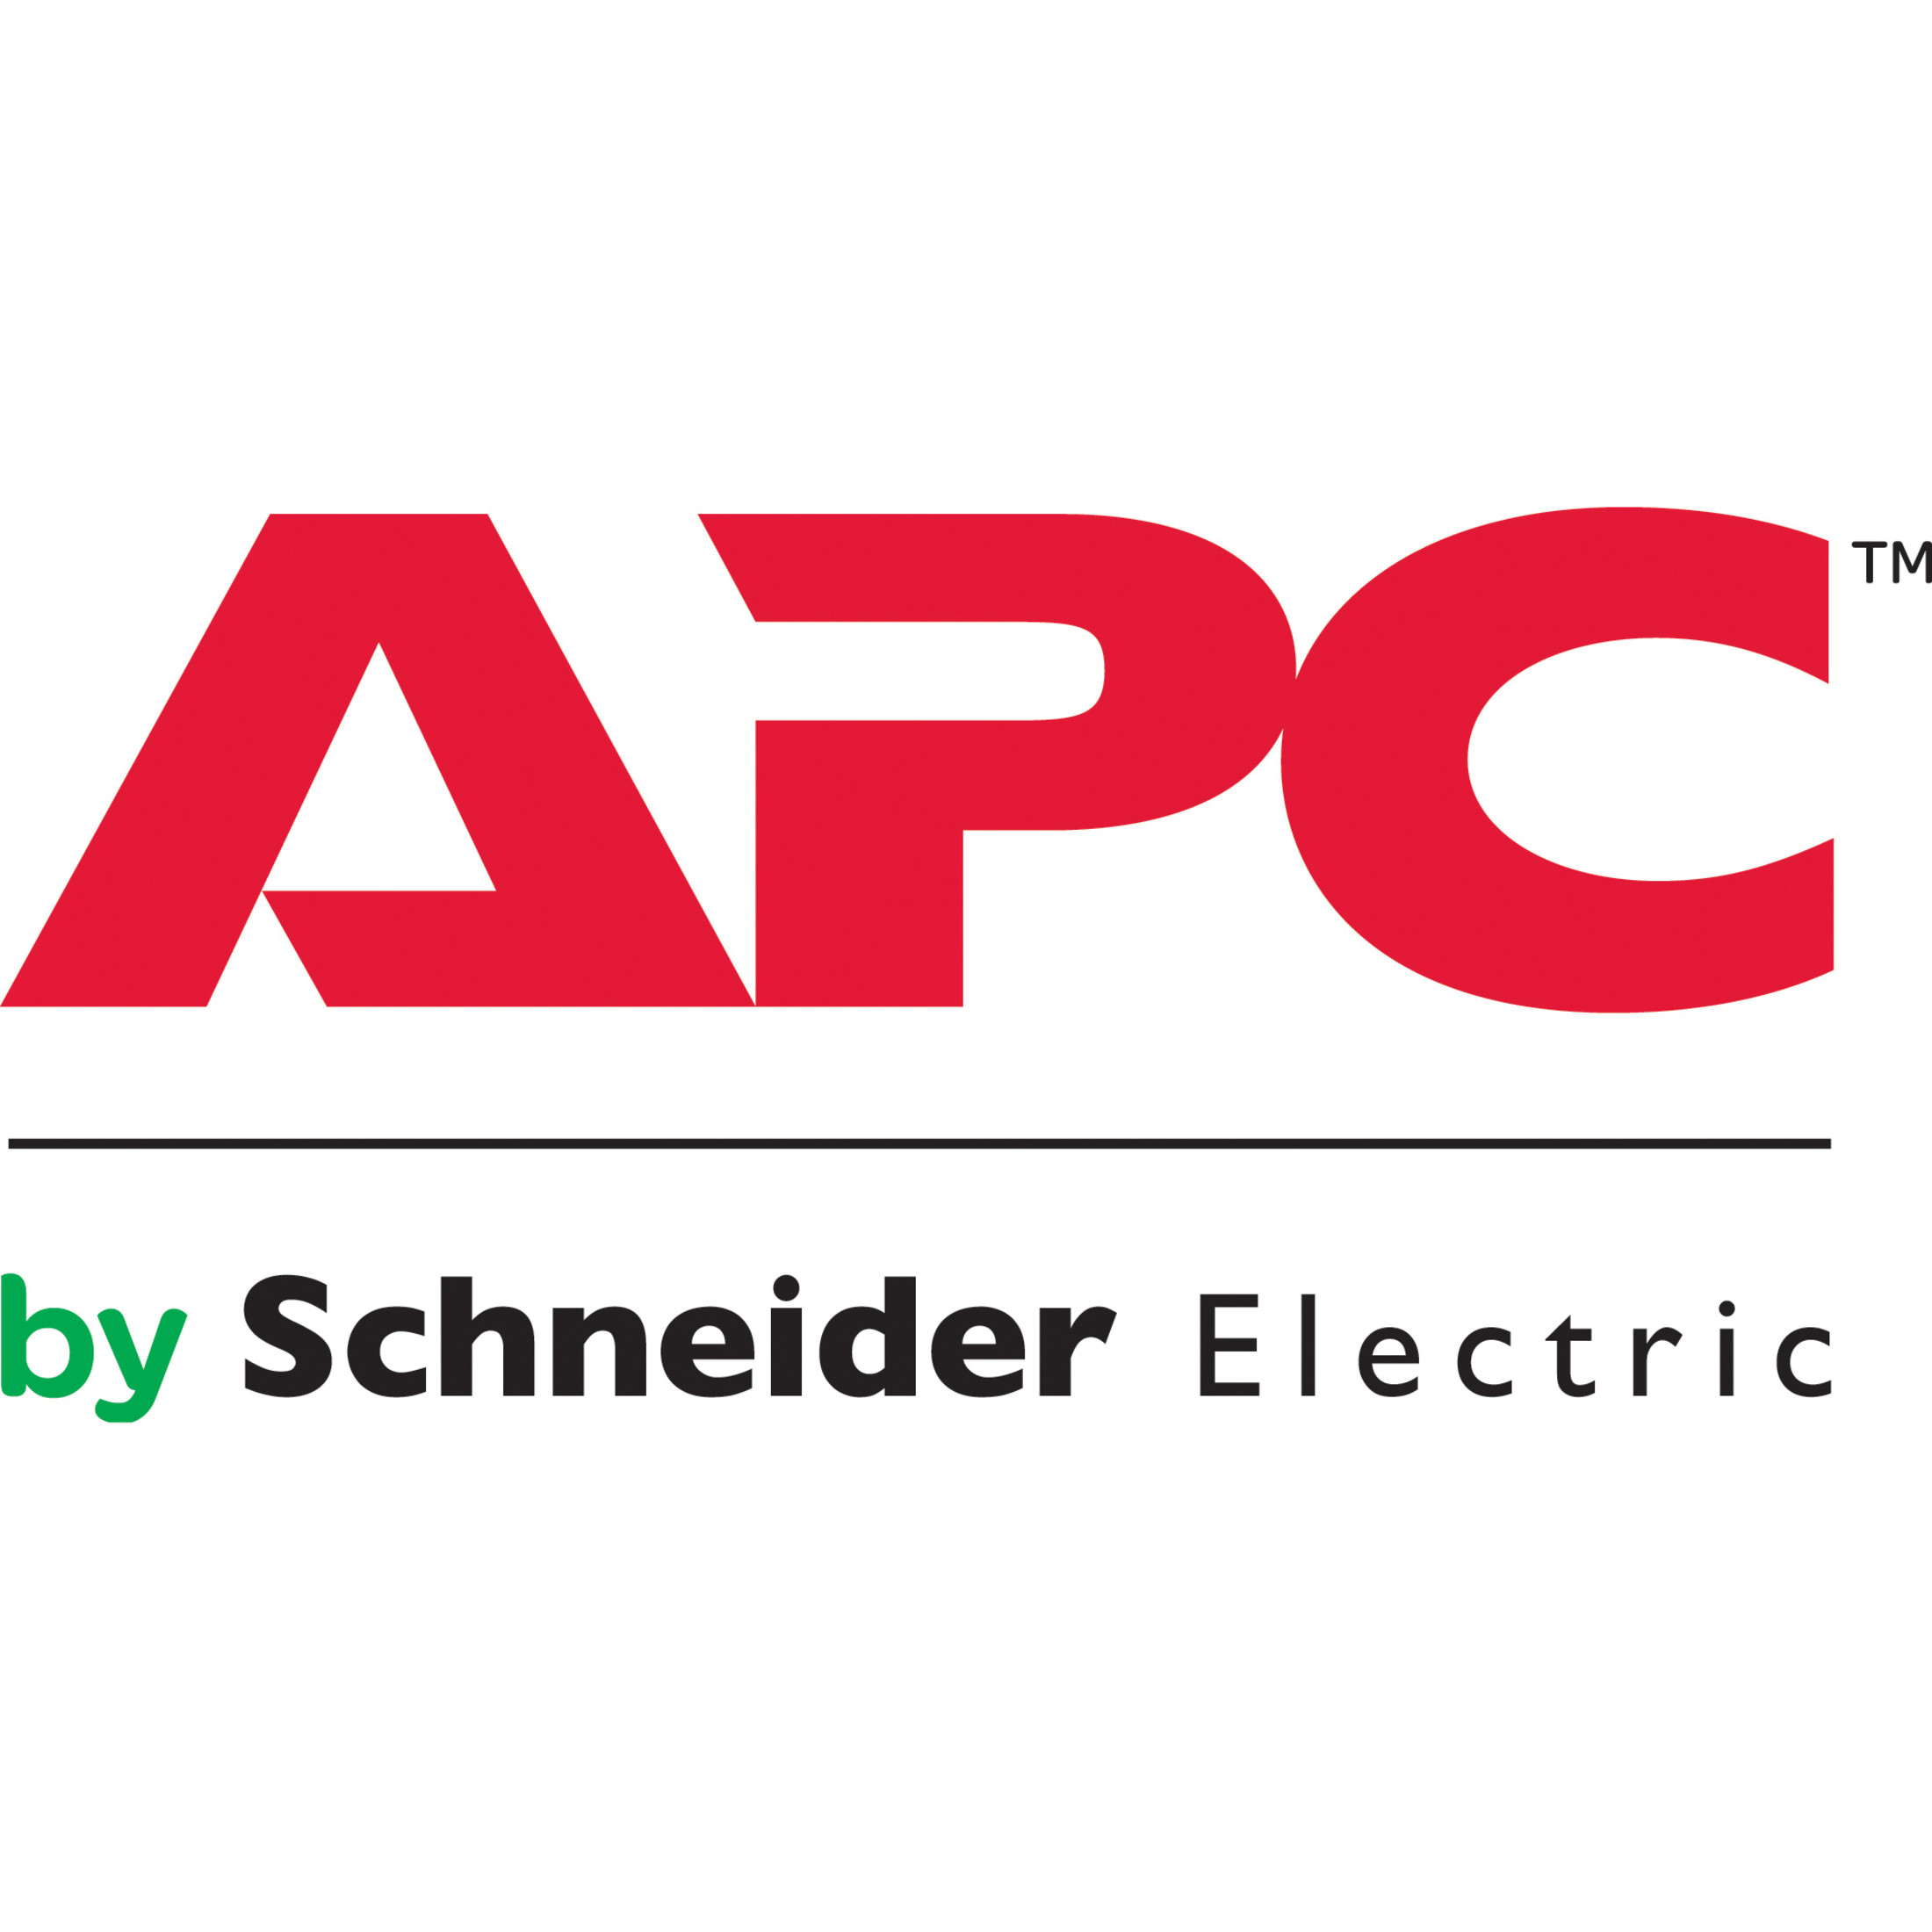 APC by Schneider Electric Service/Support UpgradeService24 x 7ExchangeElectronic and Physical WUPGBATRPL7-UP-02